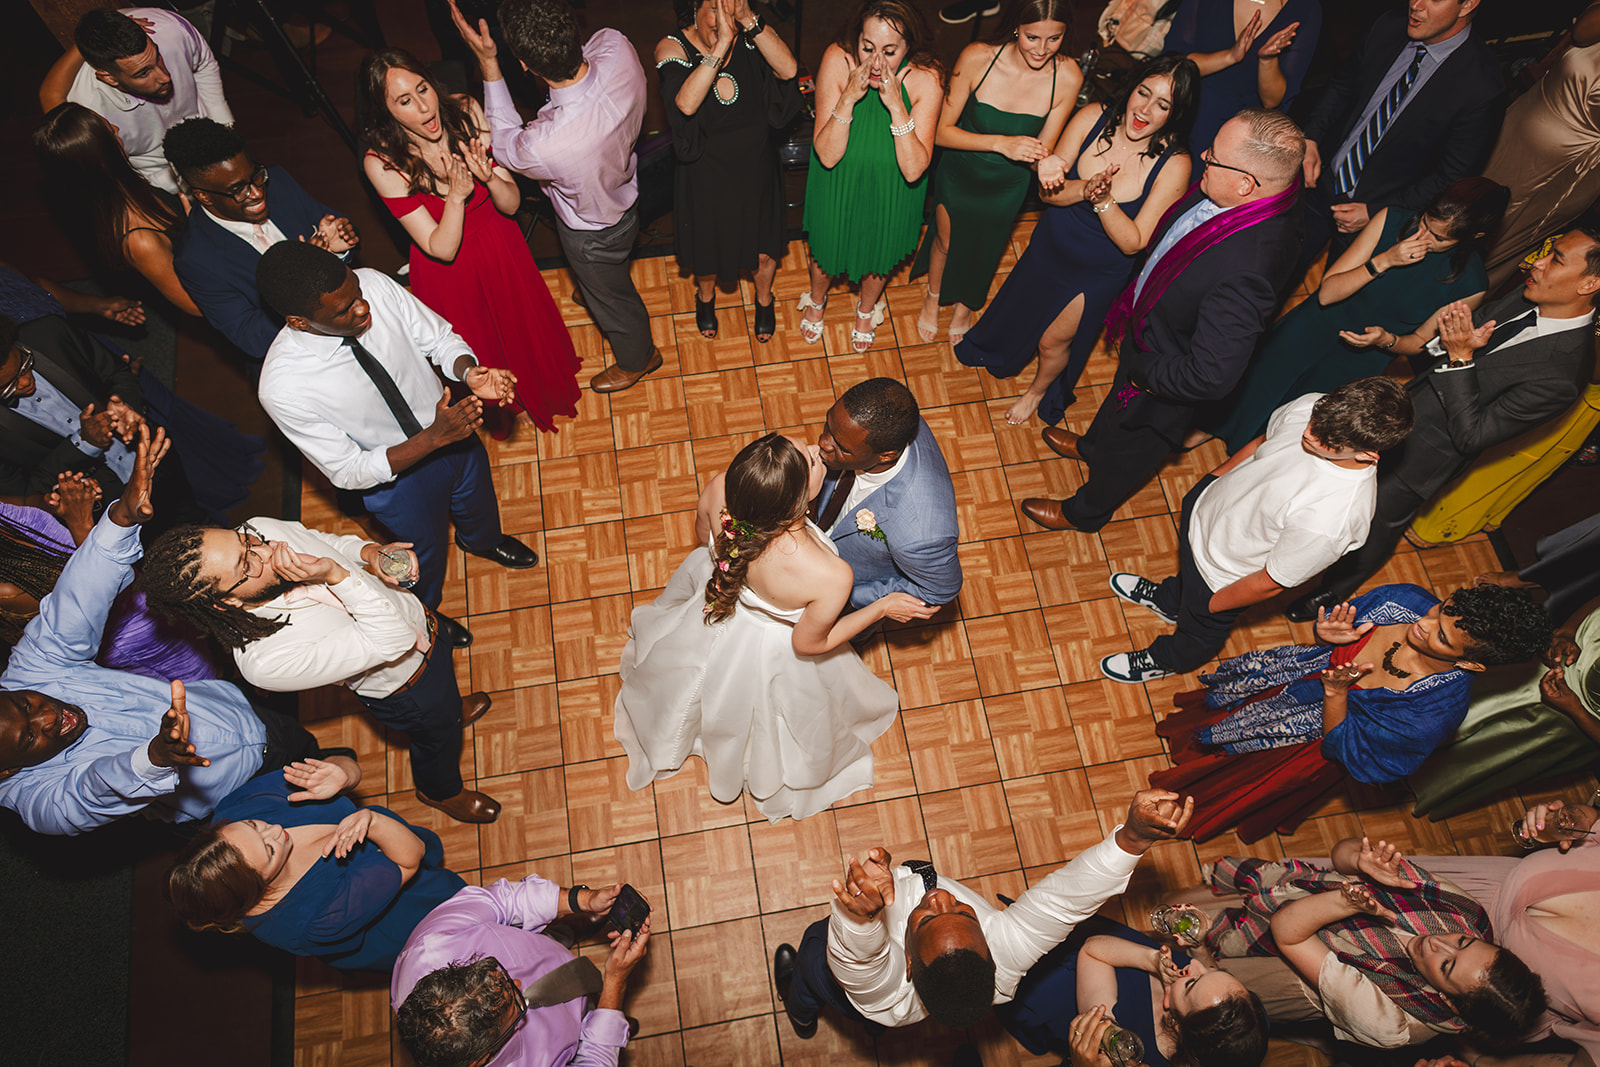 an overhead view of a bride and groom dancing  surrounded by their wedding guests